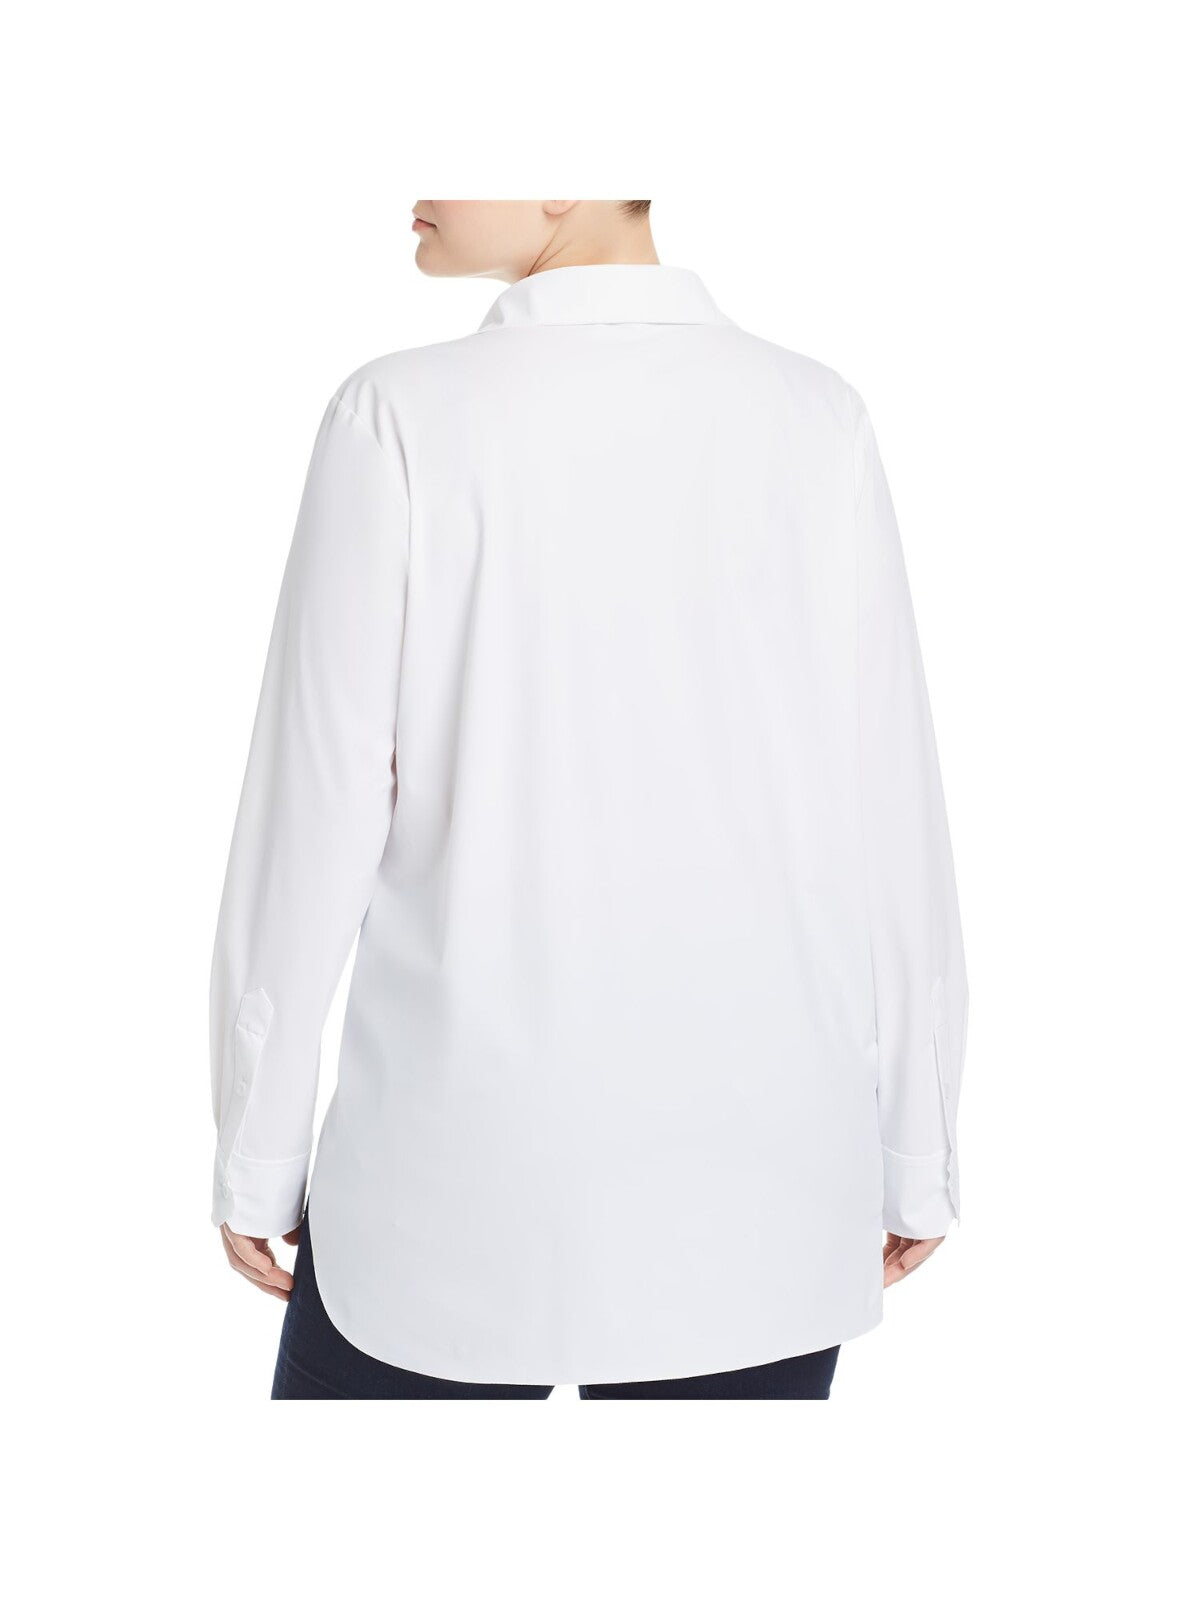 LYSSE Womens White Cuffed Sleeve Collared Wear To Work Button Up Top Plus 1X